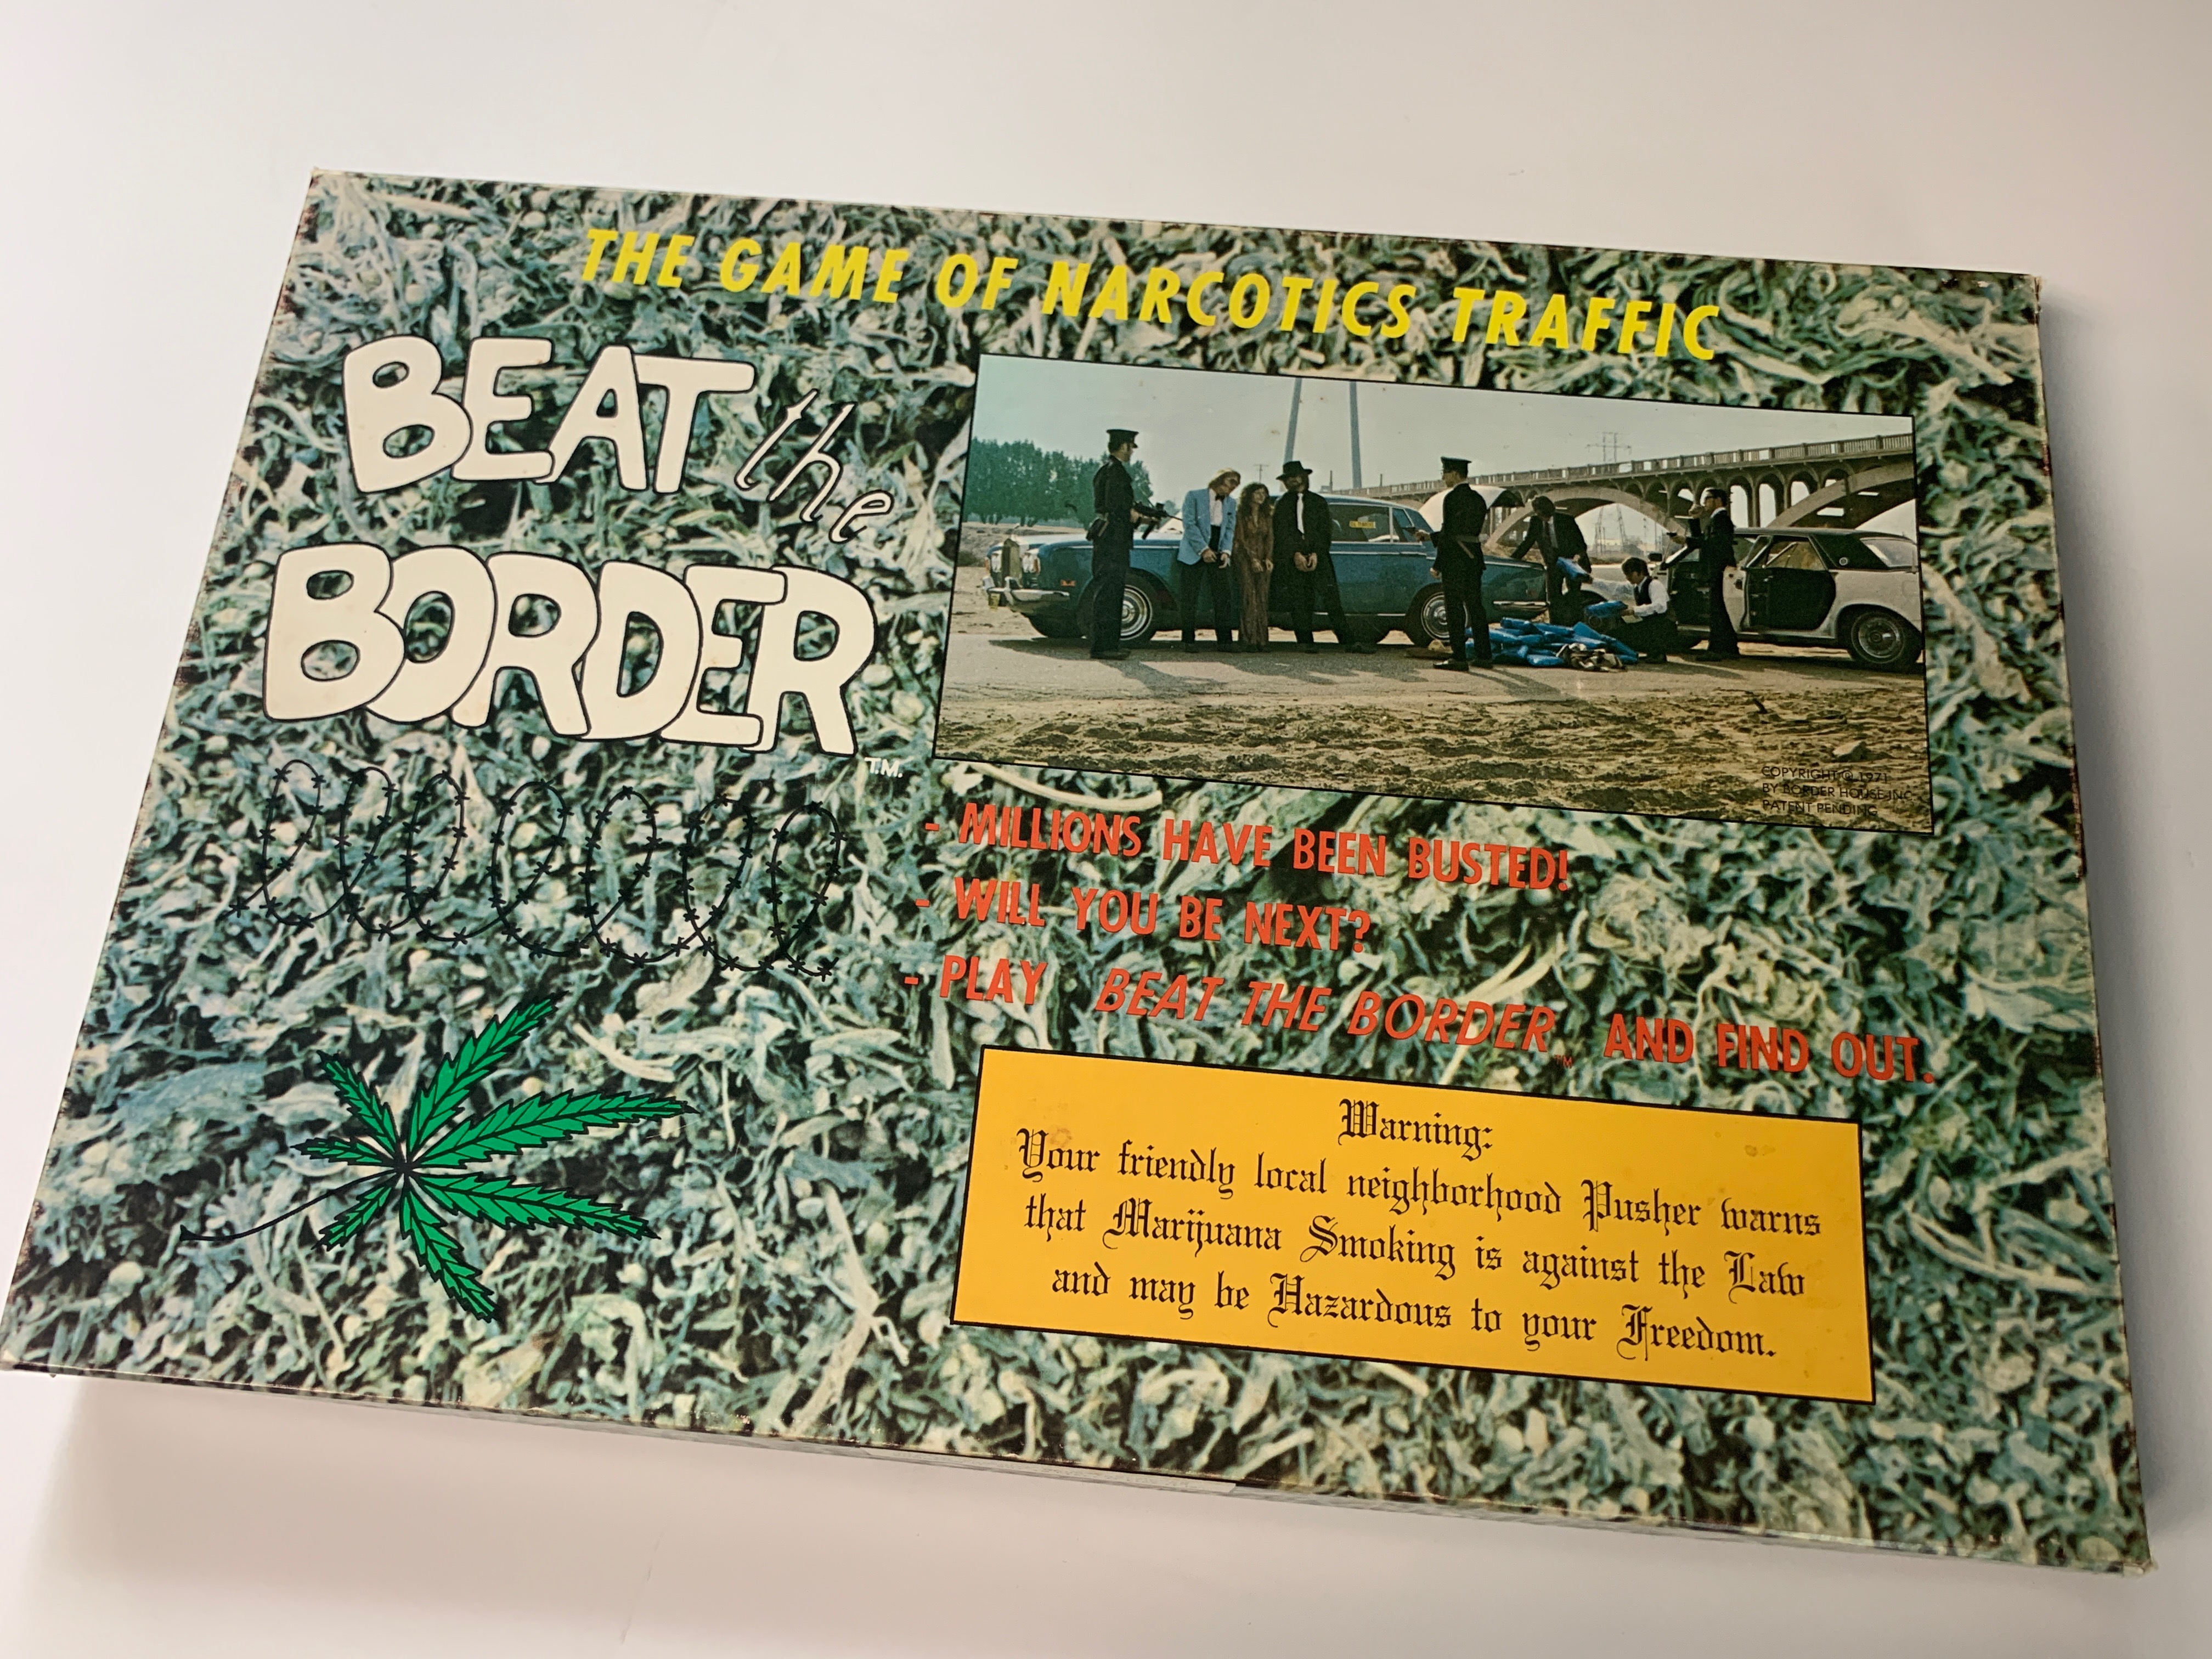 36. [Board Games]. BEAT THE BORDER: The Game of Narcotics Traffic.